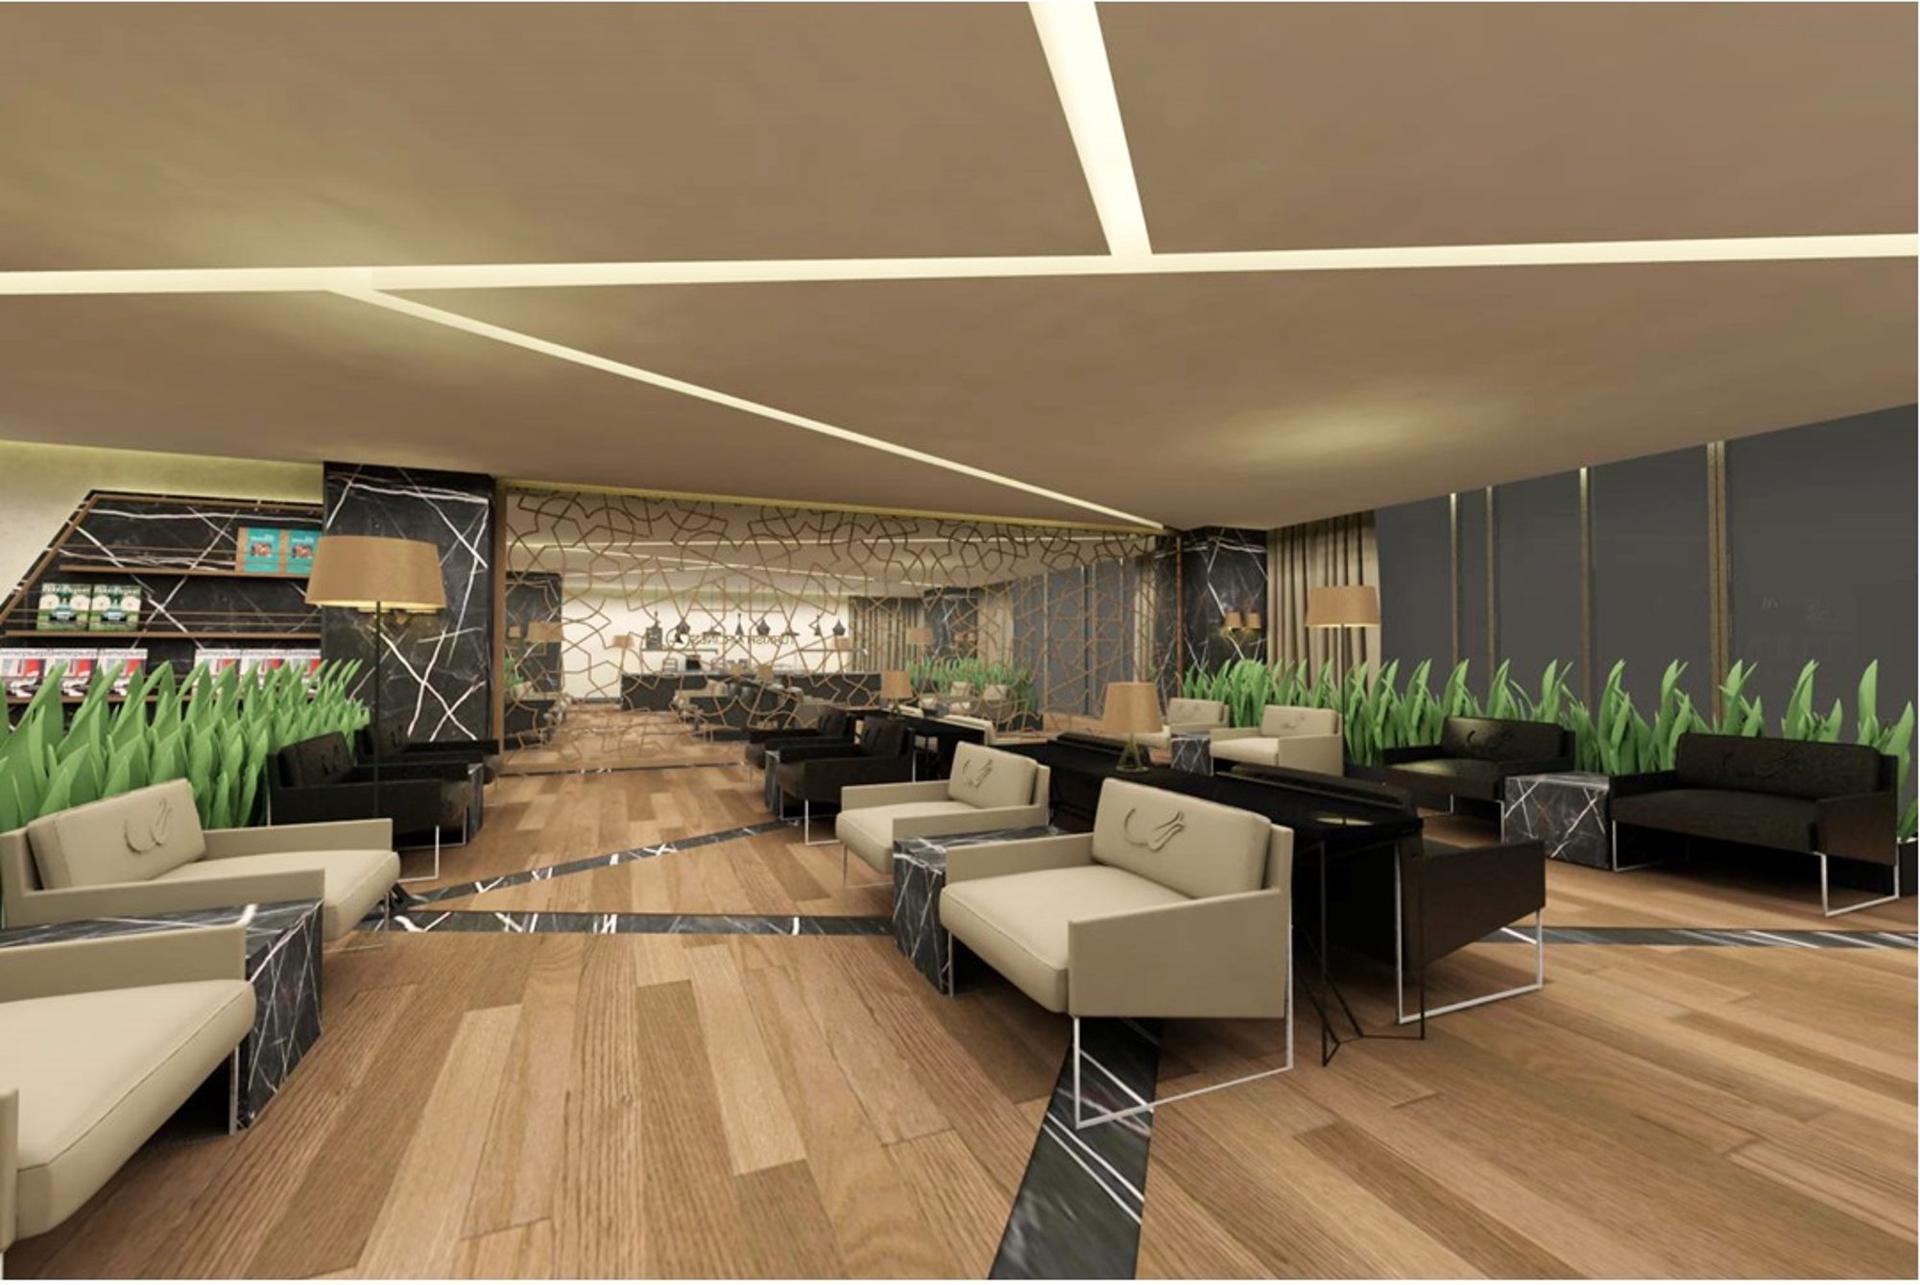 Turkish Airlines CIP Lounge (Business Lounge) image 6 of 27